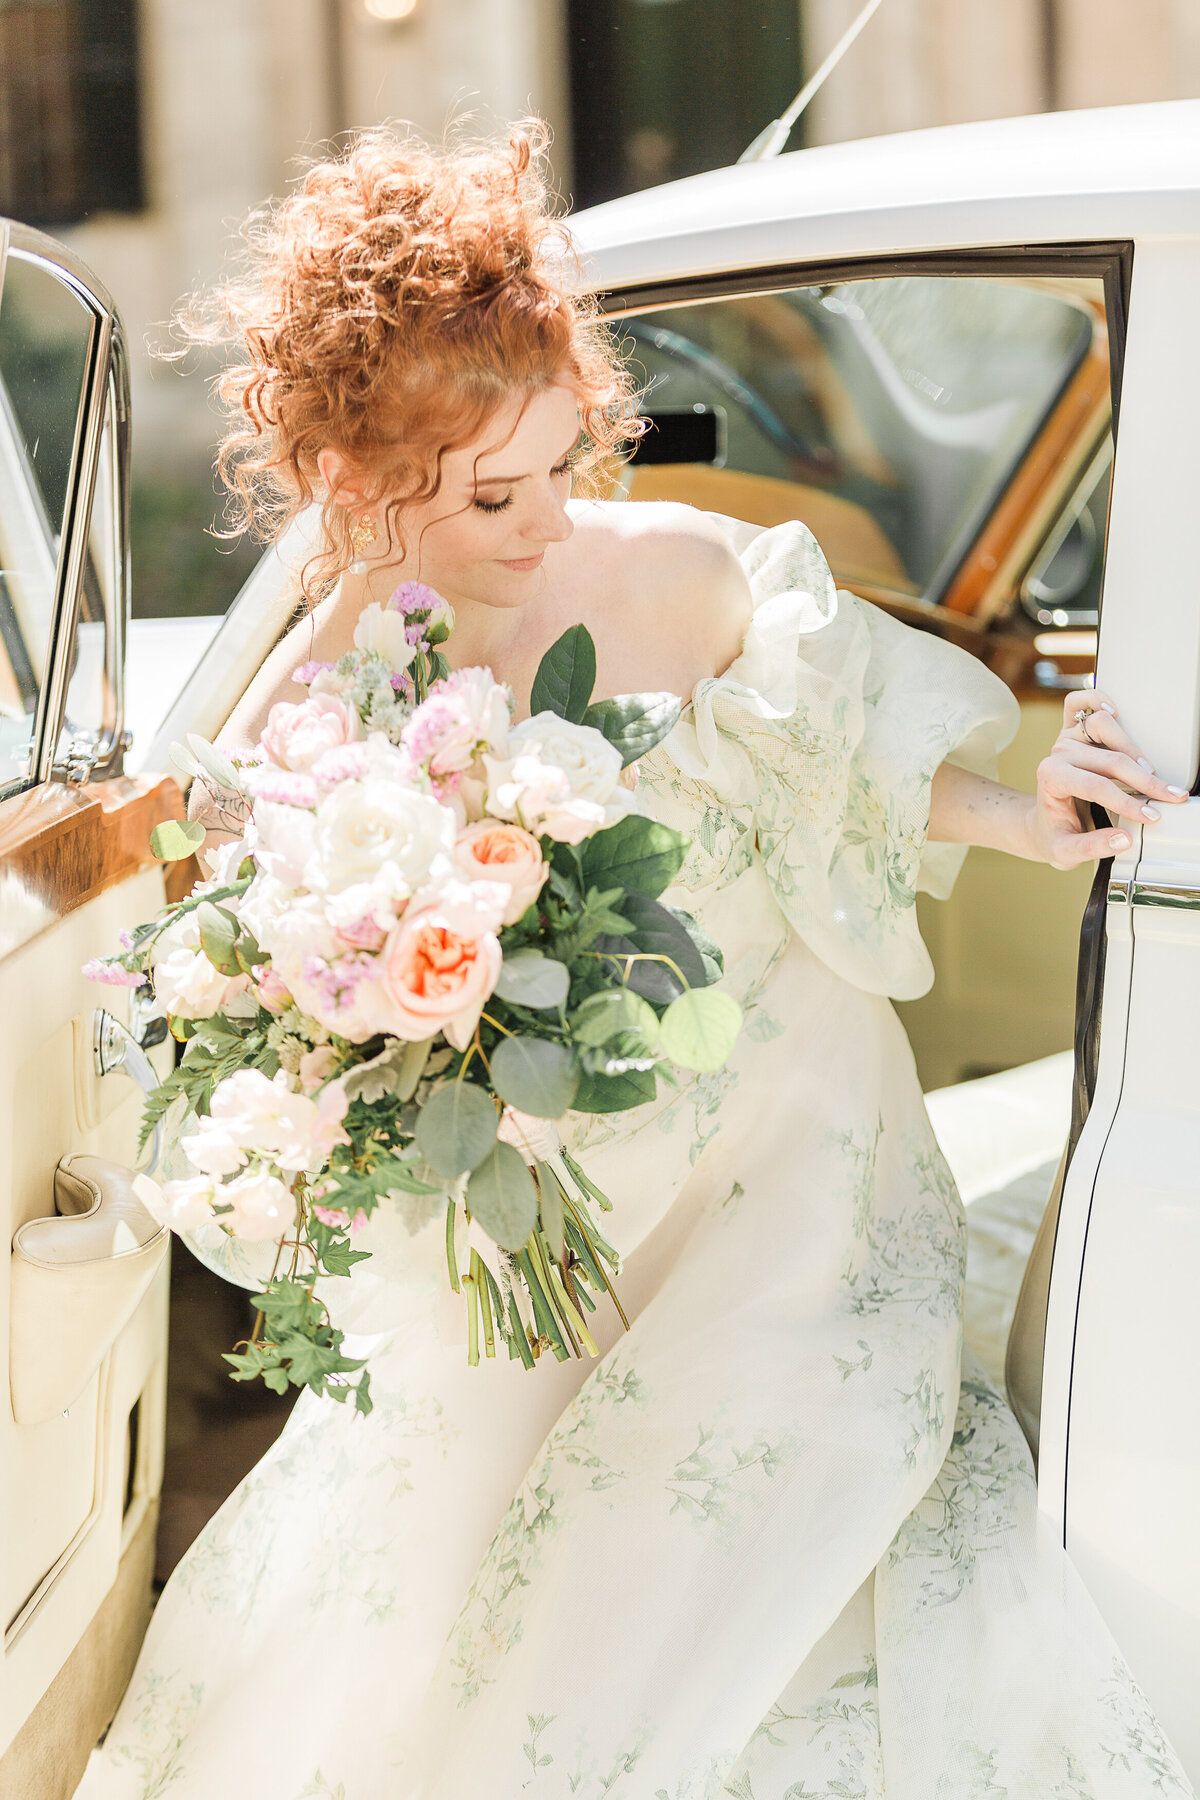 Bride is captured exiting a vintage Rolls Royce holding a large bouquet of lowers. Her red curly hair is upswept. Captured by best Massachusetts wedding photographer Lia Rose Weddings